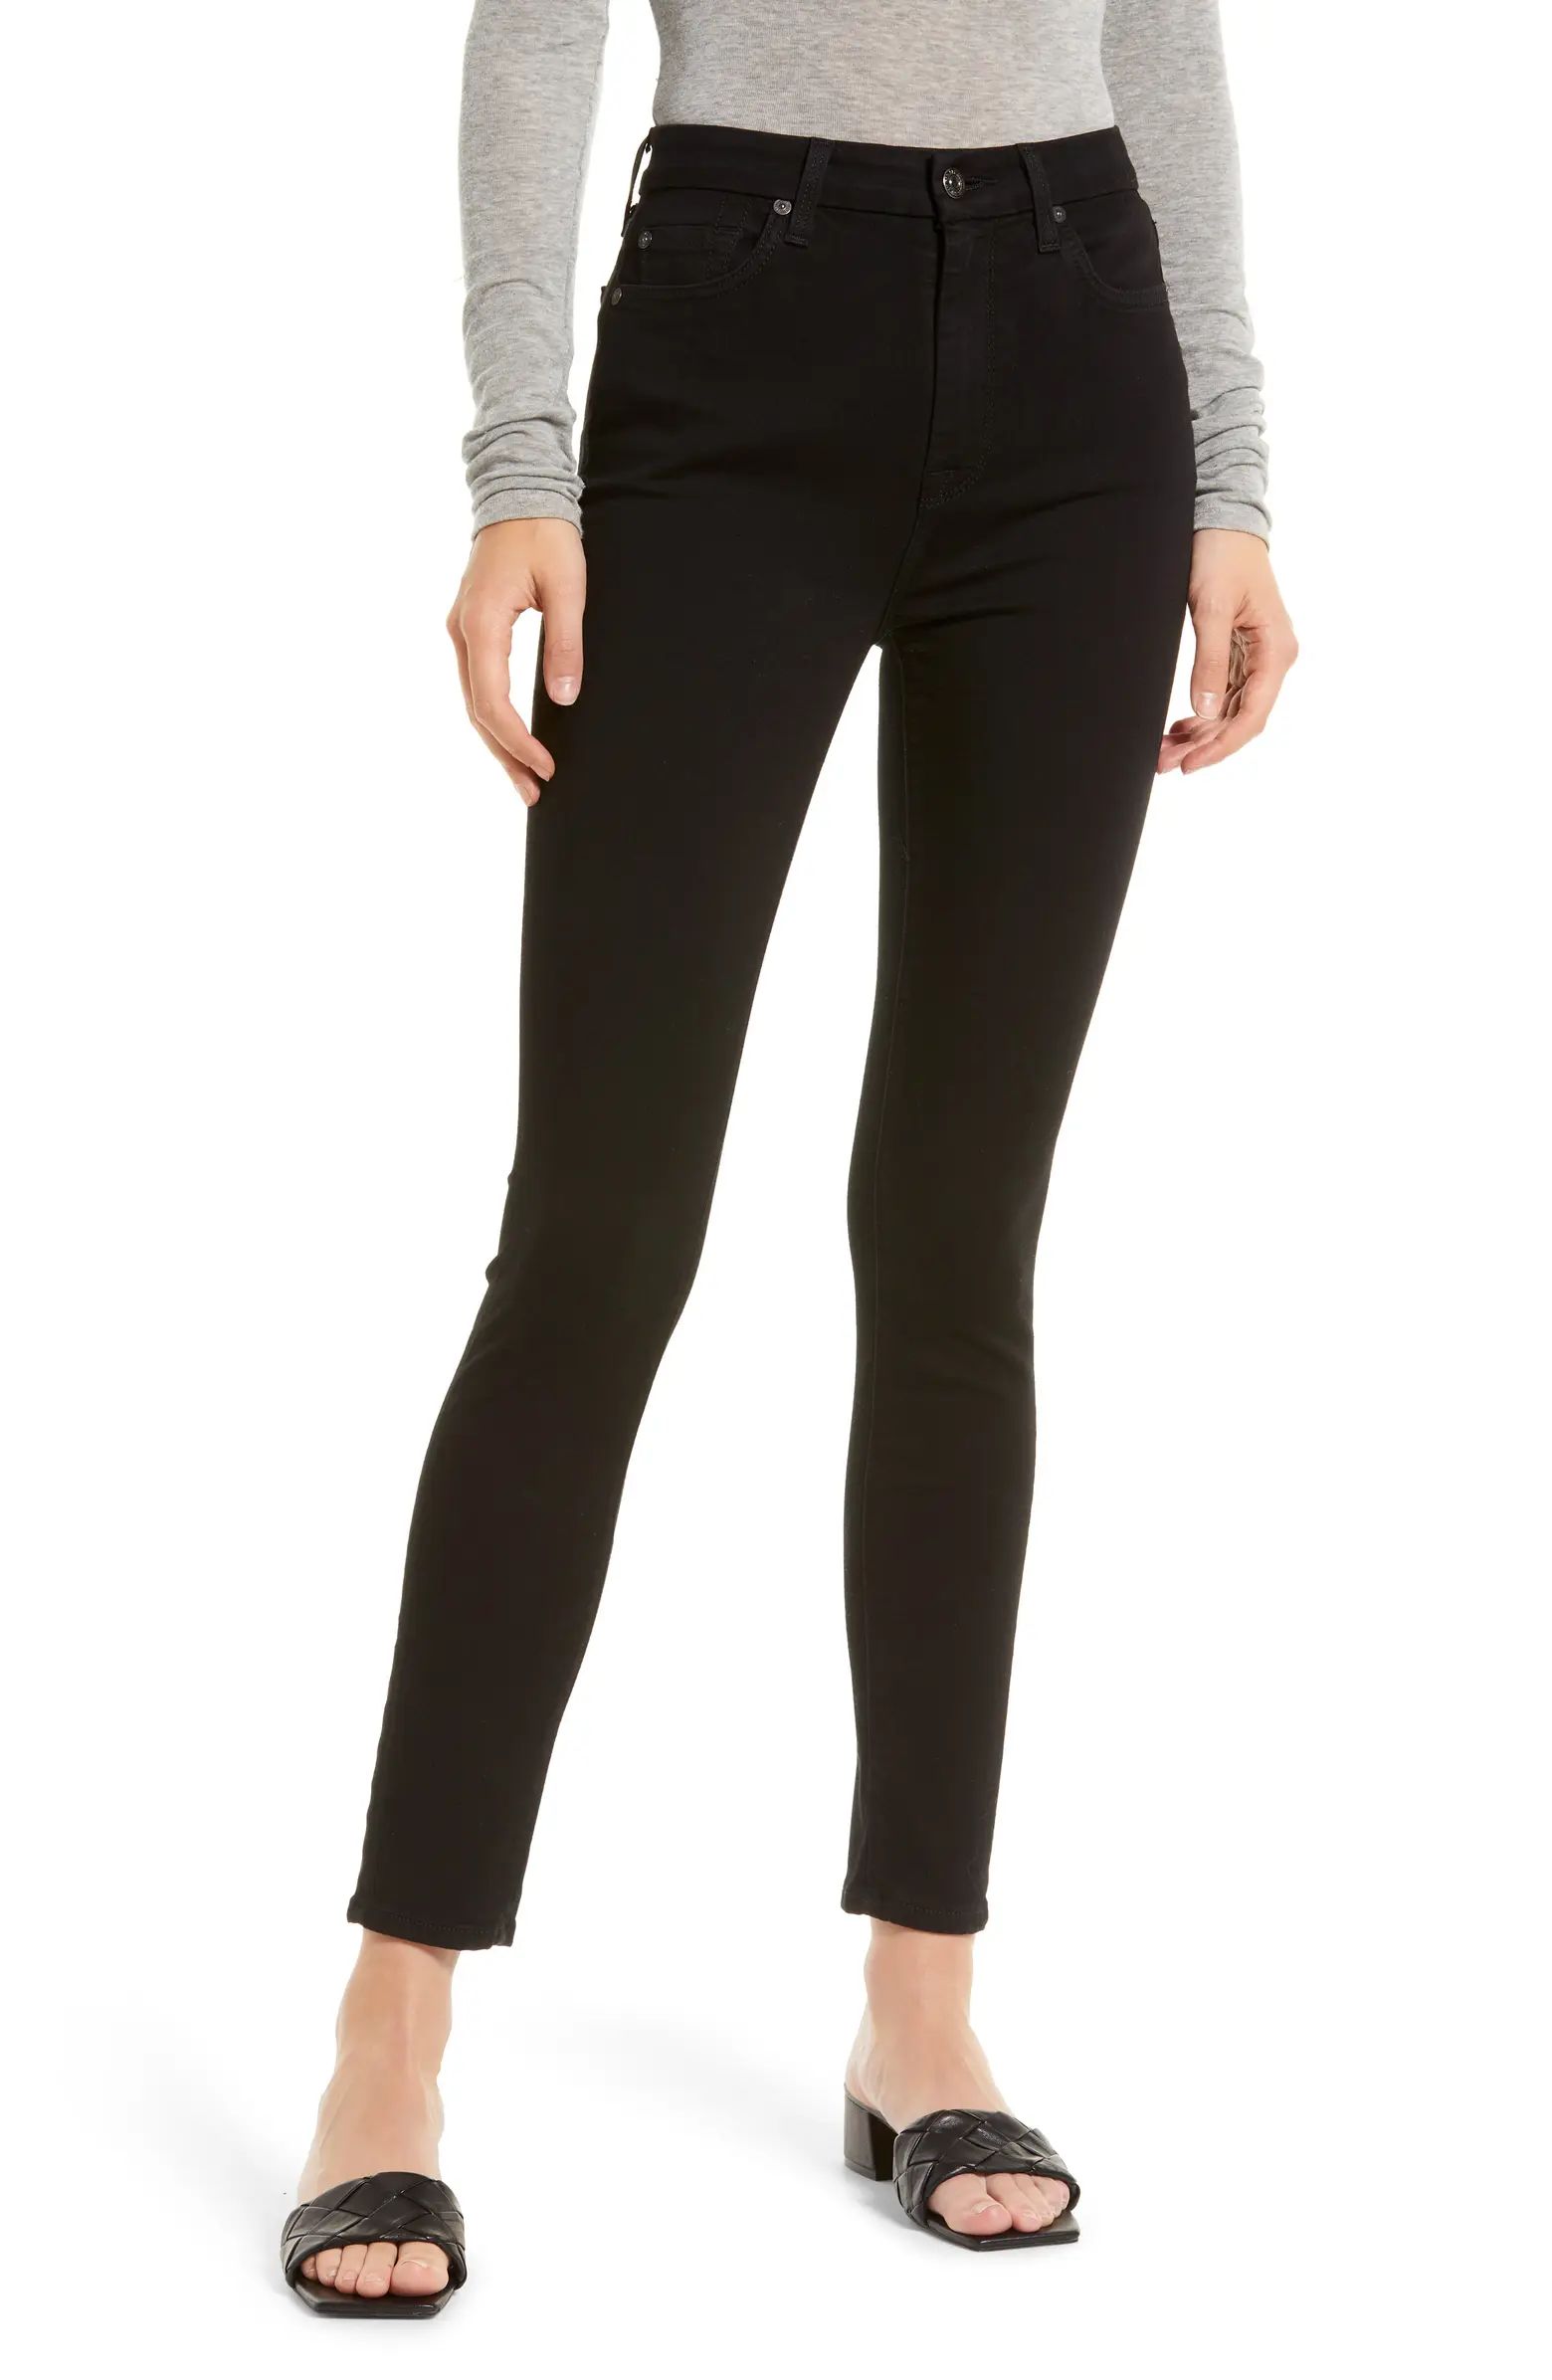 7 For All Mankind High Waist Ankle Skinny Jeans | Nordstrom | Nordstrom